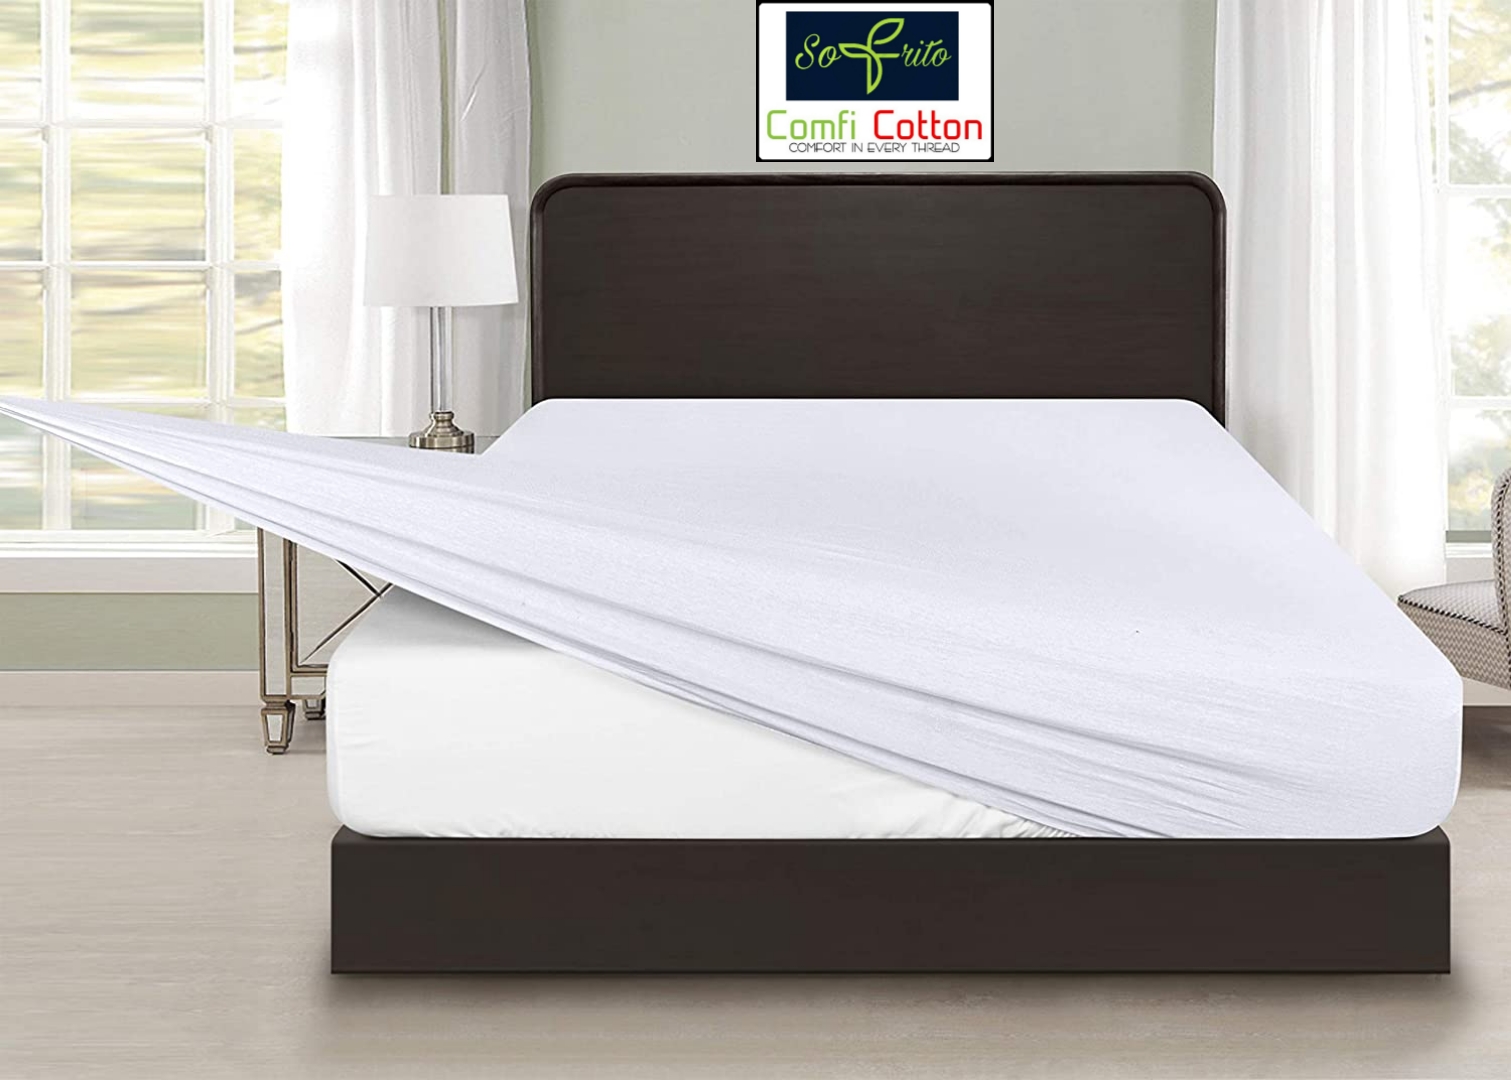 Fitted Bedsheet 100% Cotton - 210 TC Percale - Plain - White